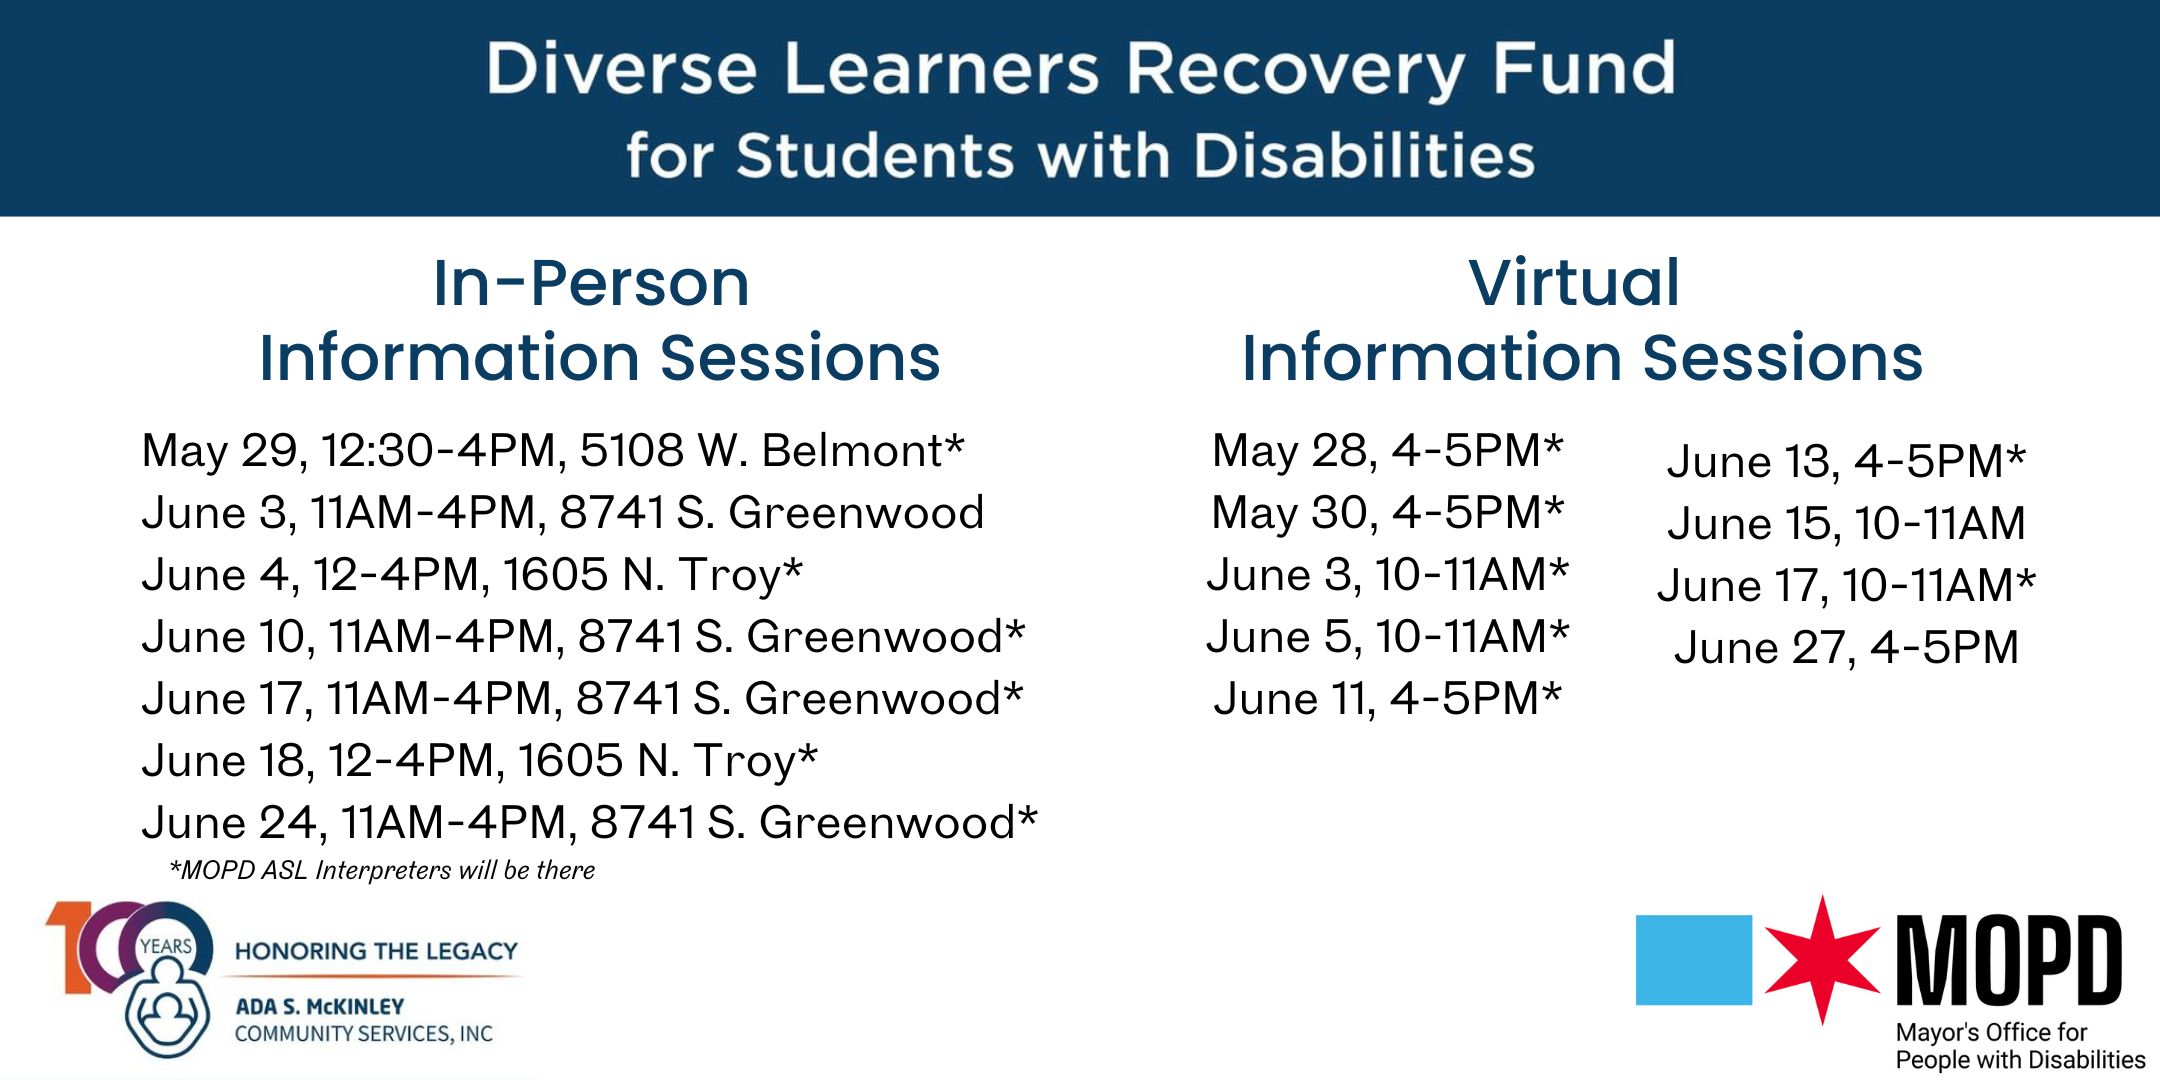 MOPD and Ada S. McKinley are offering upcoming information sessions related to the Diverse Learners Recovery Fund. For more information, visit adamopd.com.